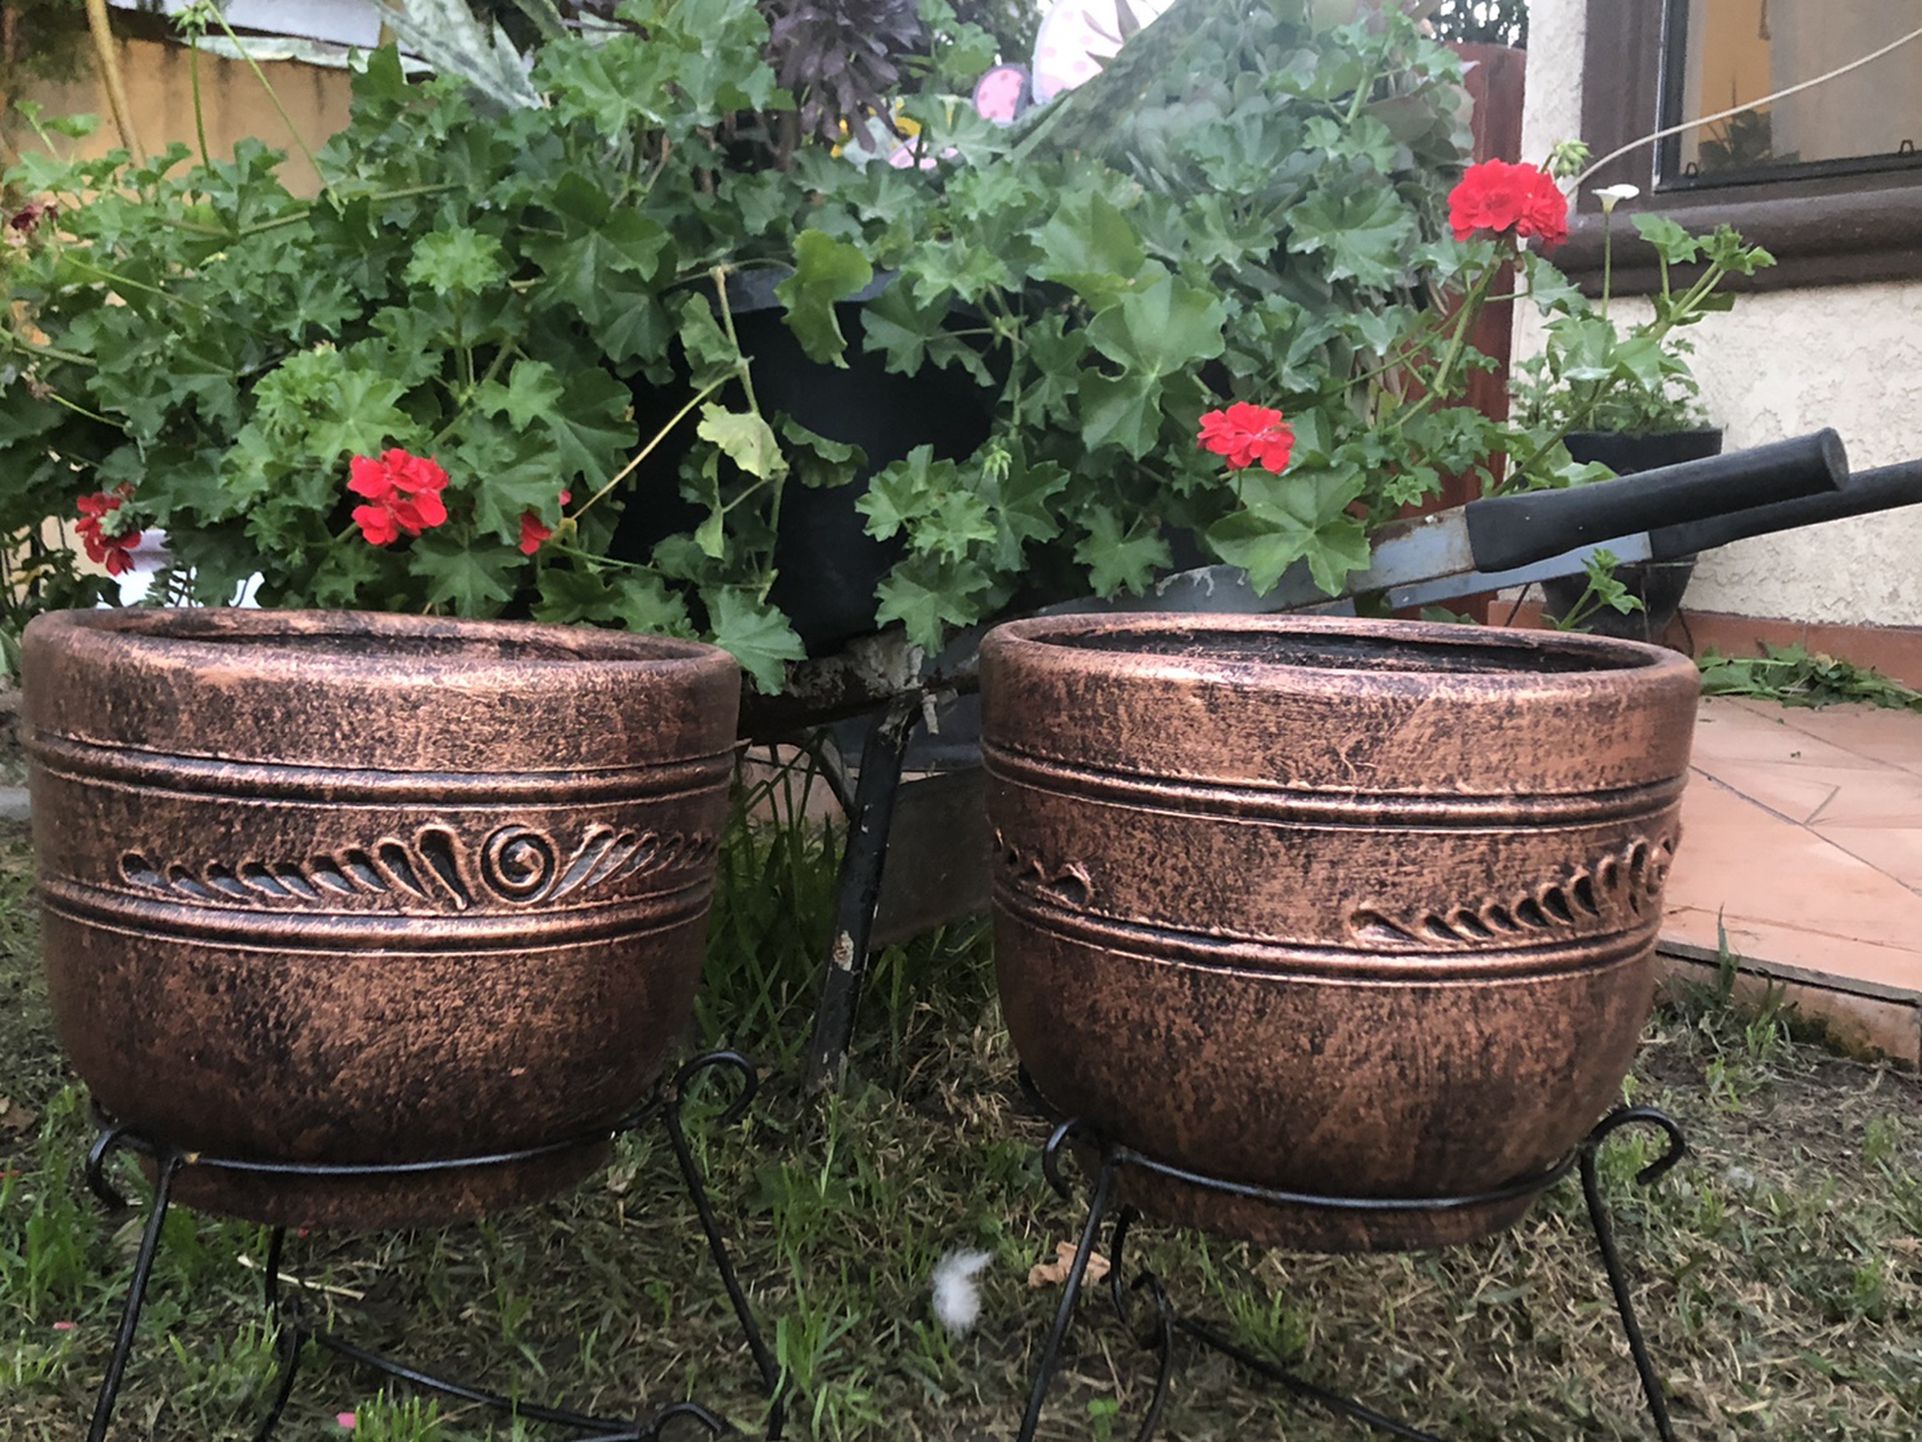 2 Clay Flower Pots 12” High 13 “wide Stand Is Not Included